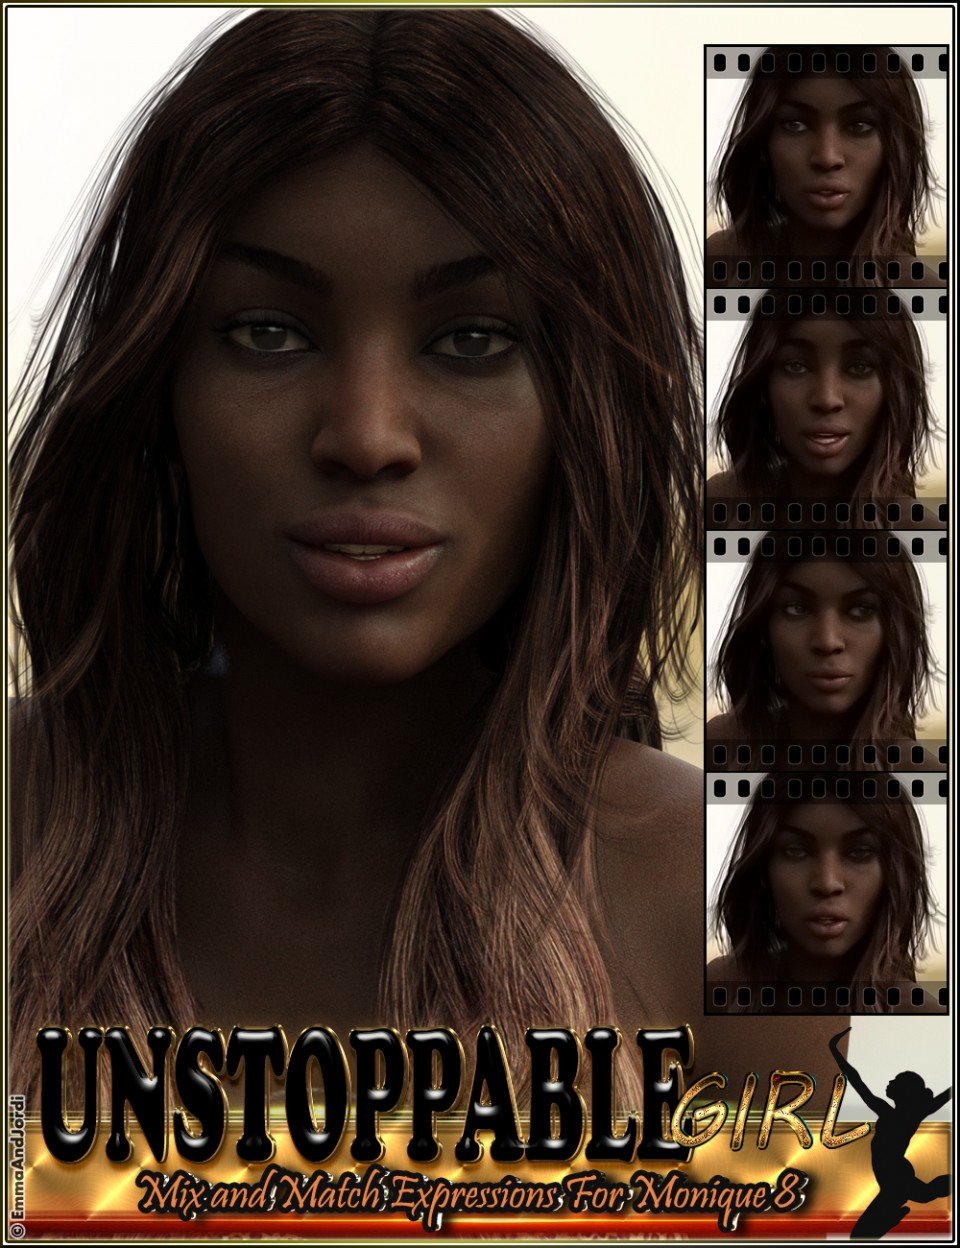 Unstoppable Girl Mix And Match Expressions For Monique 8 And Genesis 8 Female(s)_DAZ3D下载站